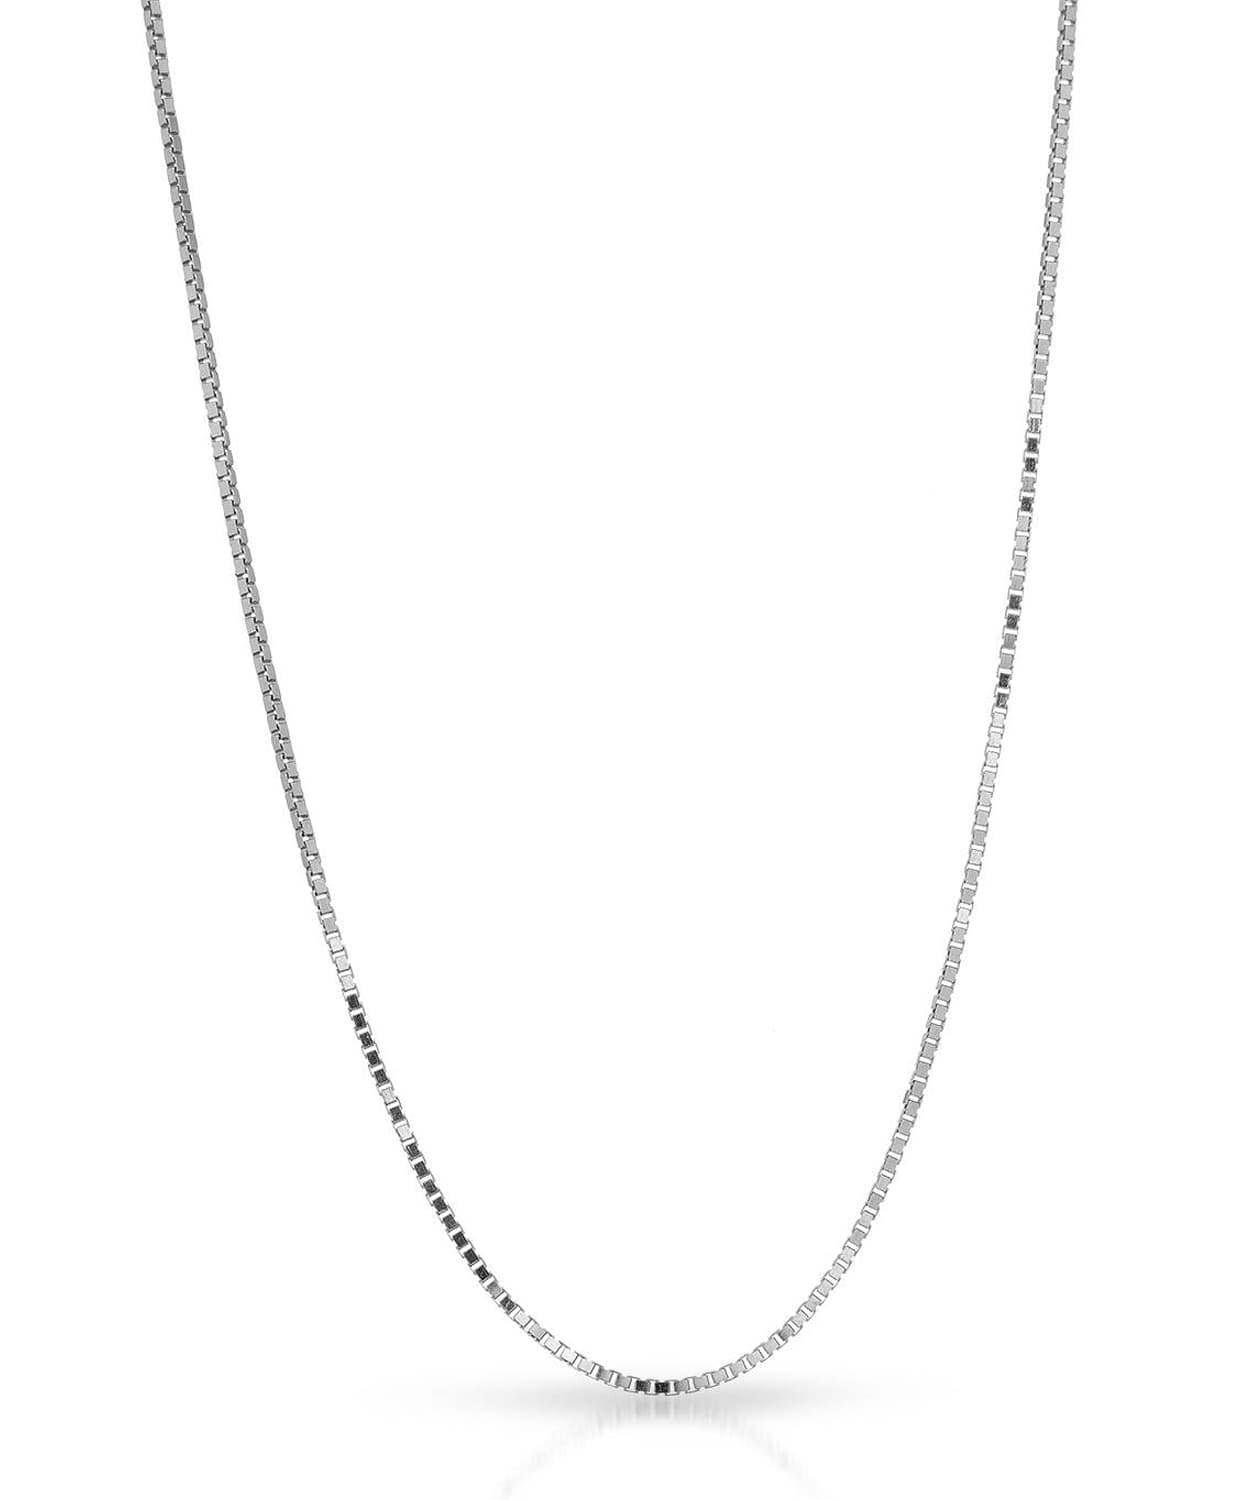 0.7mm 14k White Gold Box Adjustable Chain View 1